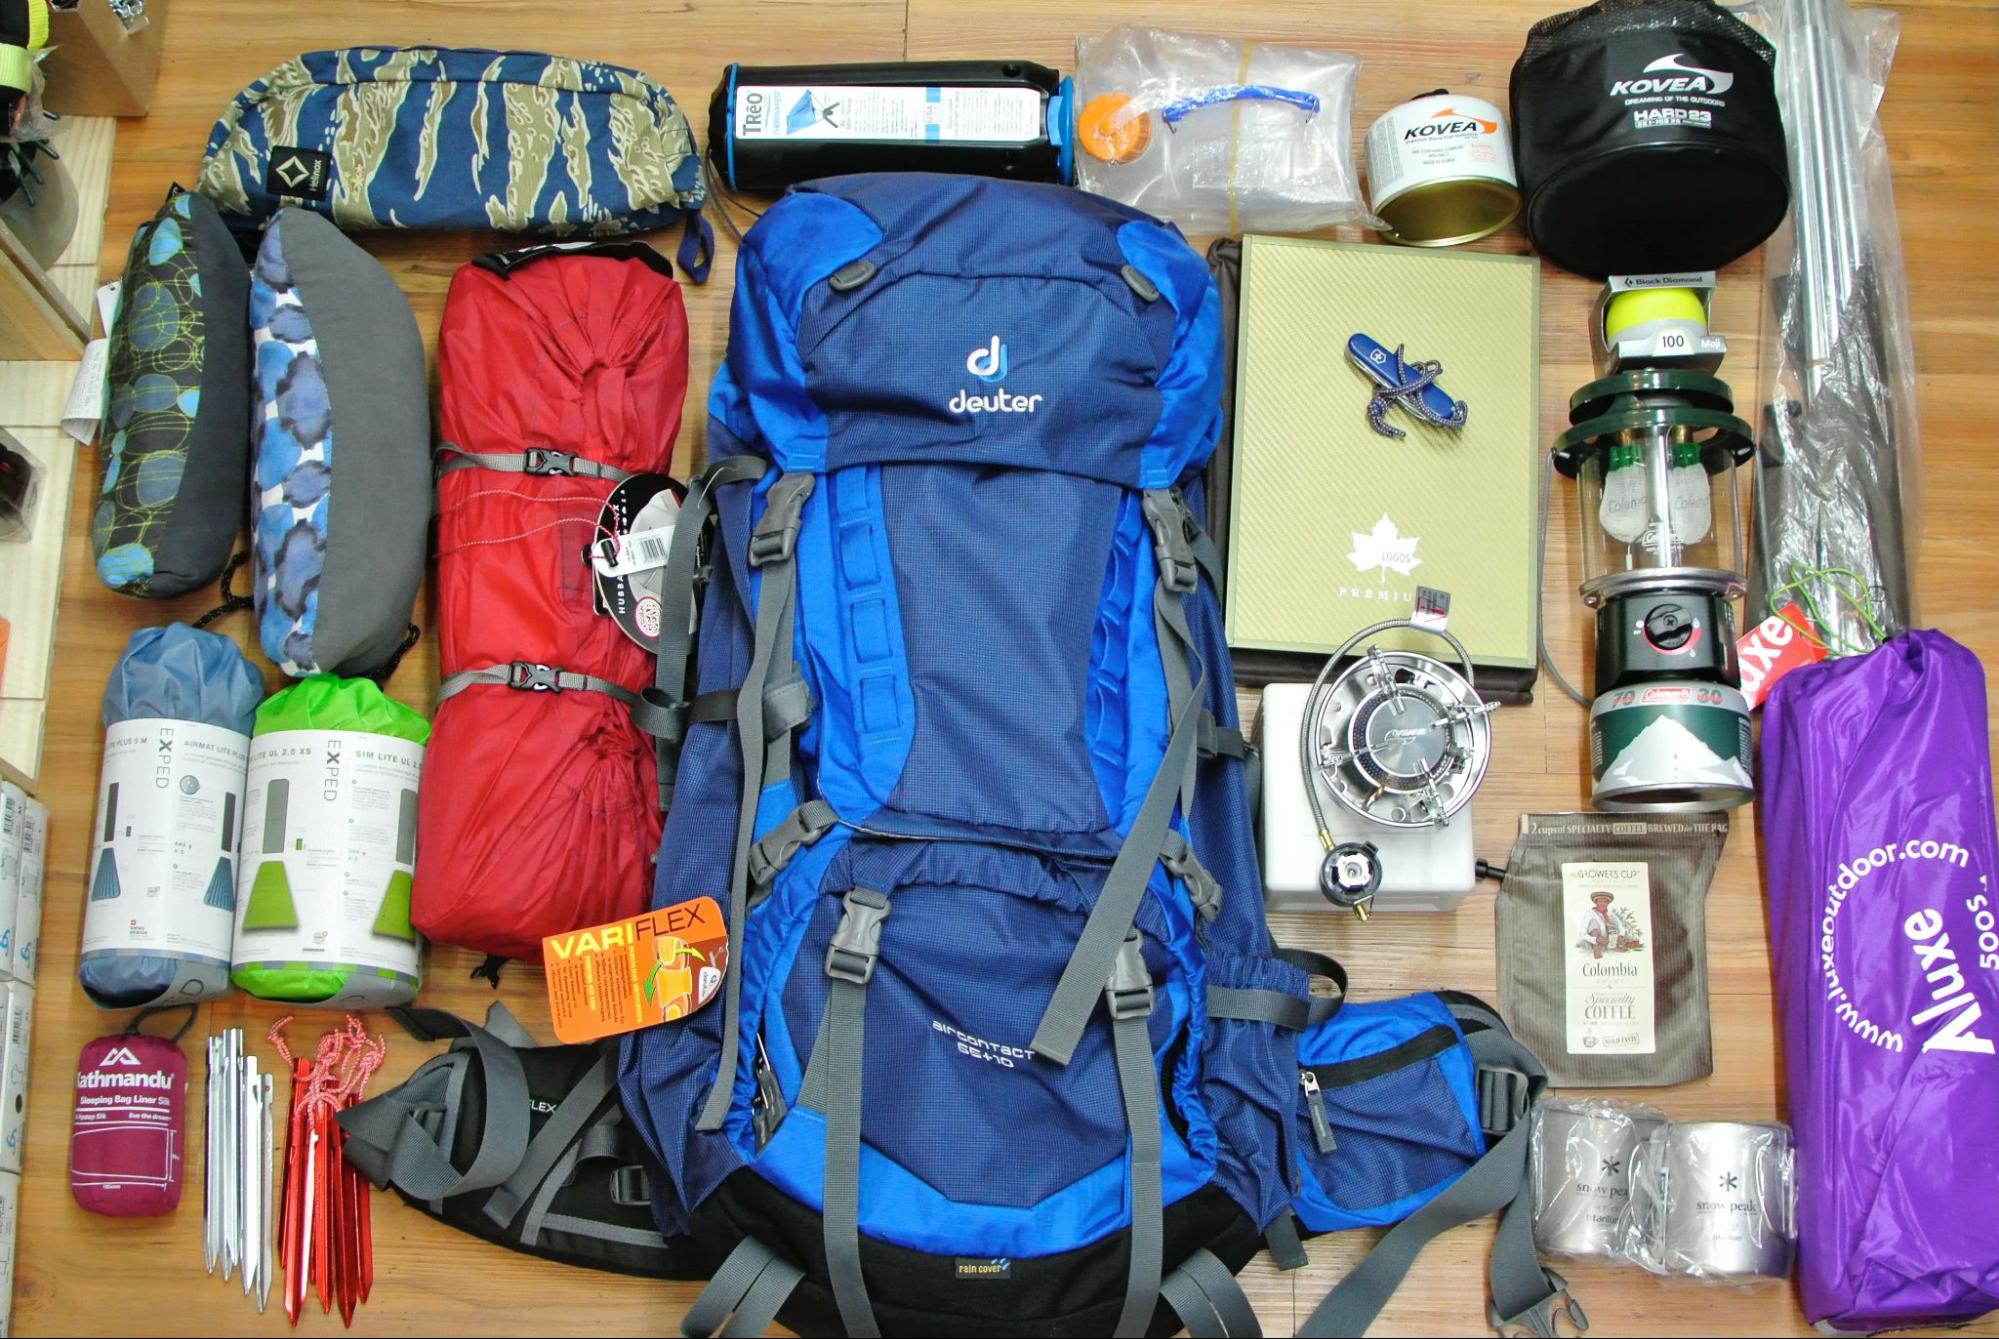 Camping and hiking gear